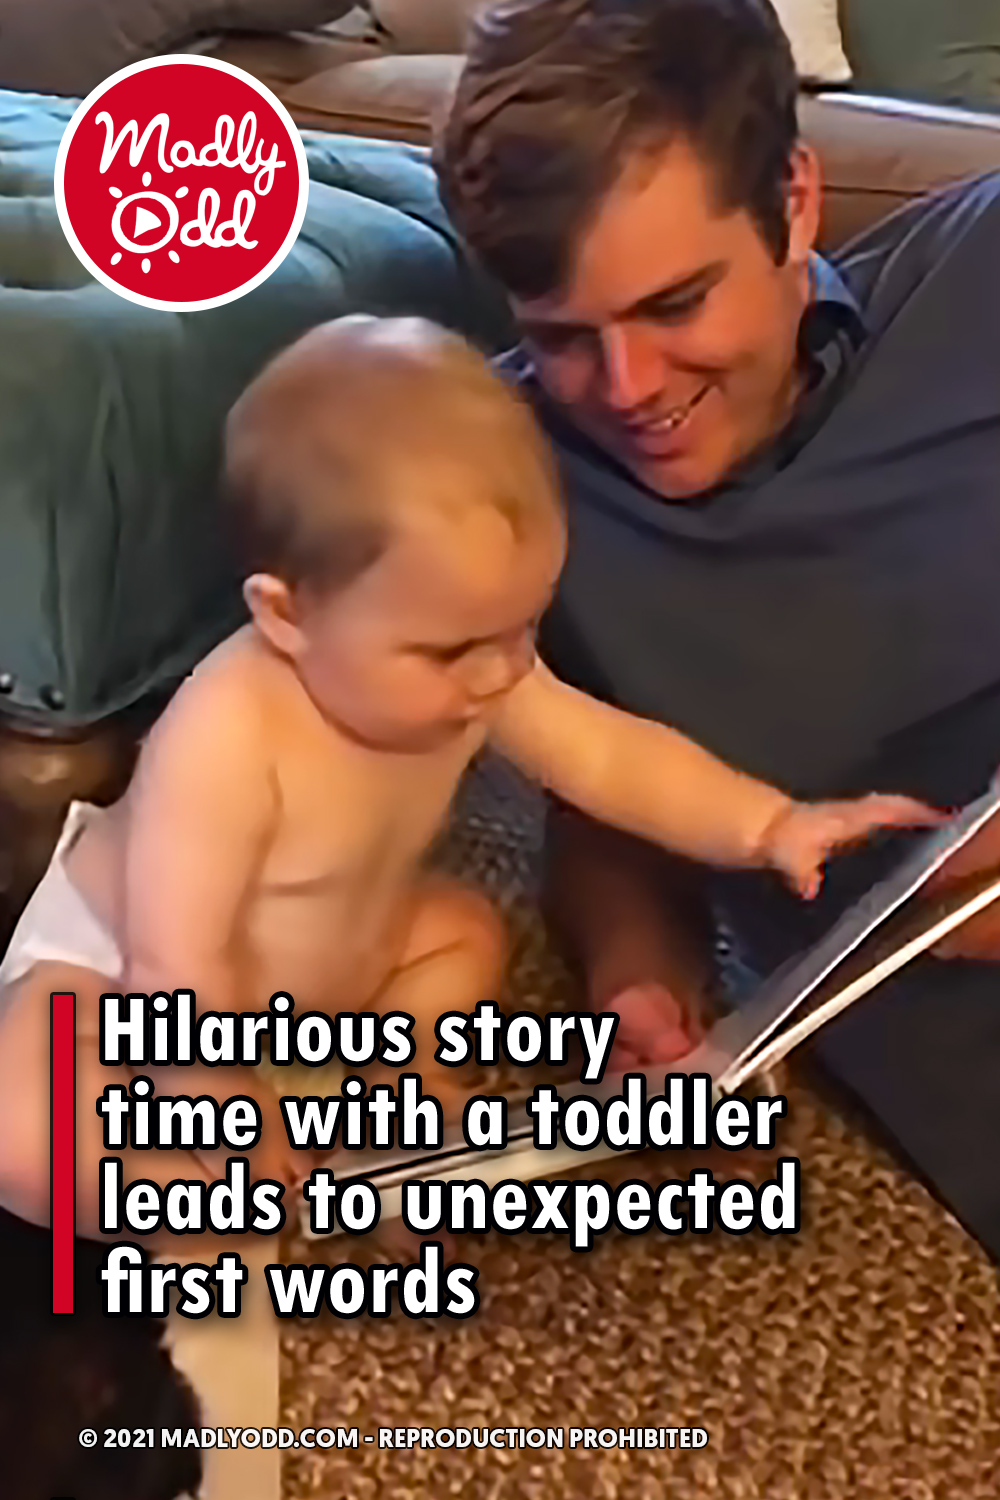 Hilarious story time with a toddler leads to unexpected first words